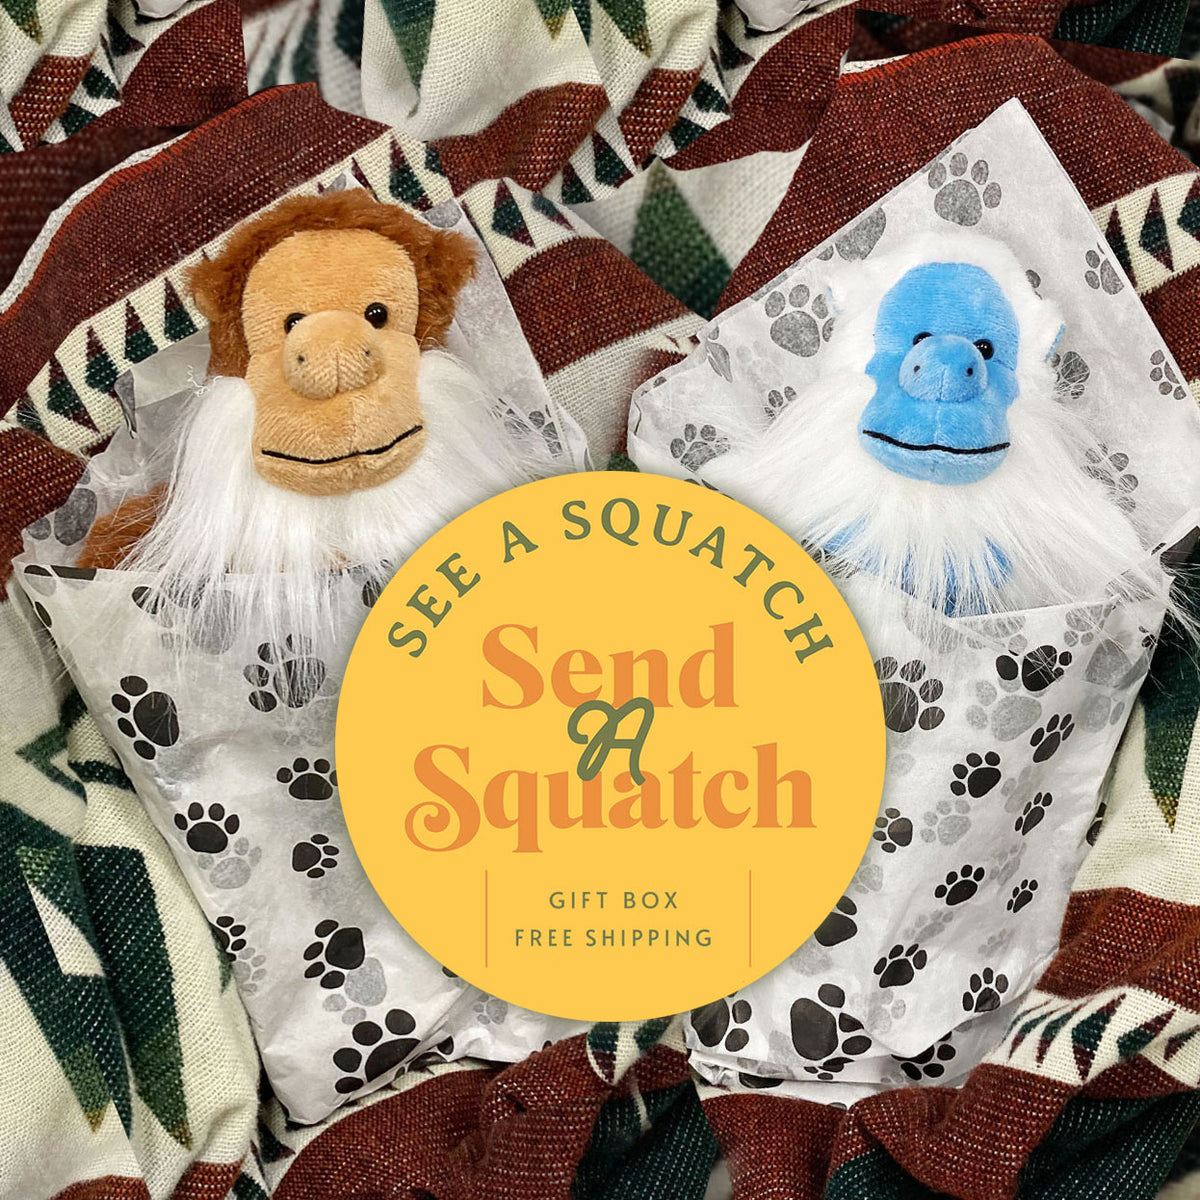 Bath & Body: Squatch This! - Gifts & Decorative Accessories